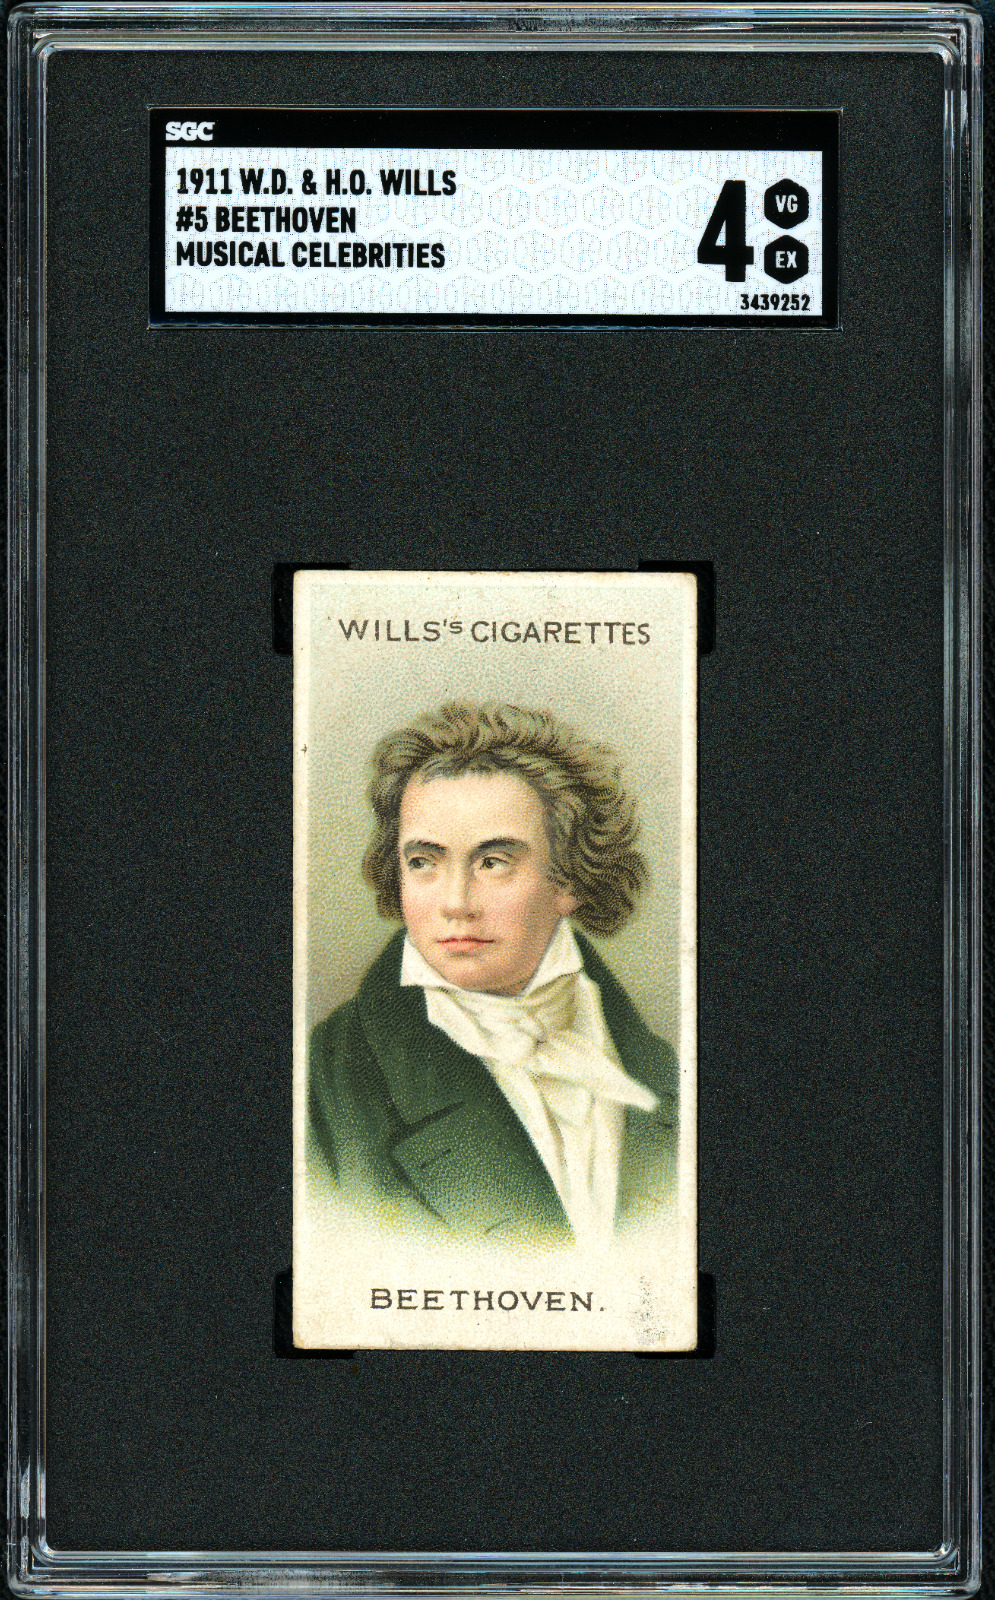 1911 Wills's Cigarettes Musical Celebrities Beethoven RC SGC 4 CENTERED HIGH END